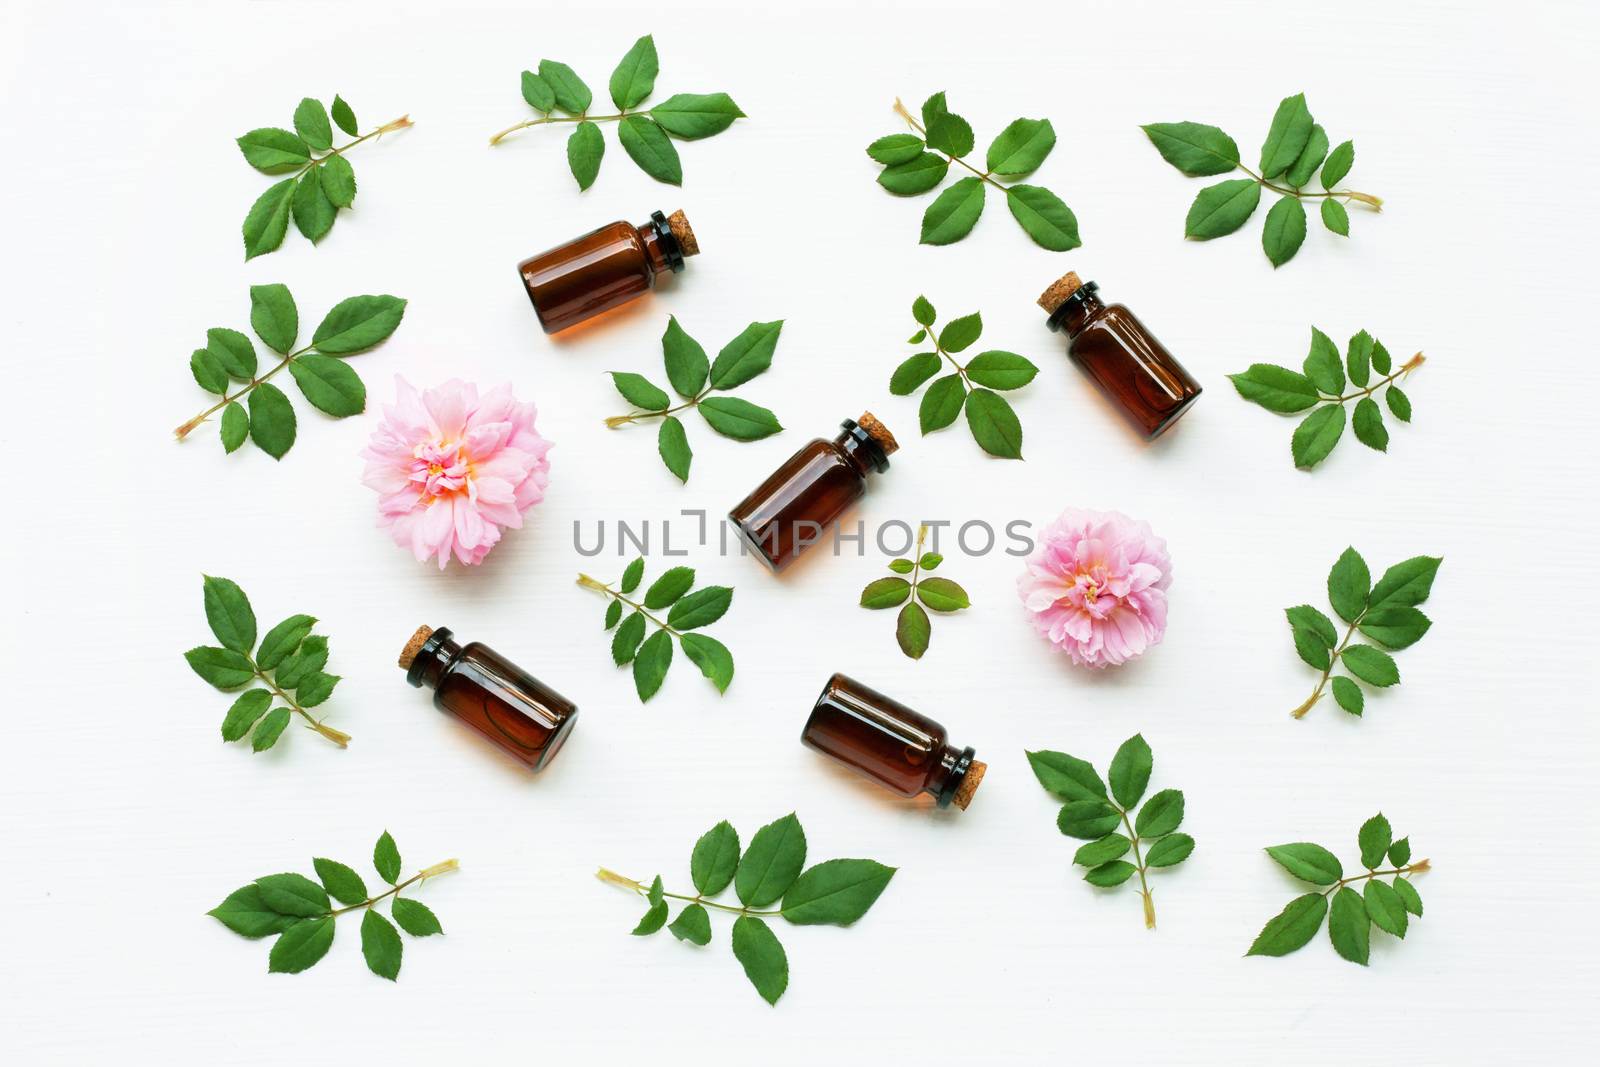 Bottles of essential rose oil for aromatherapy, Huntington Rose.